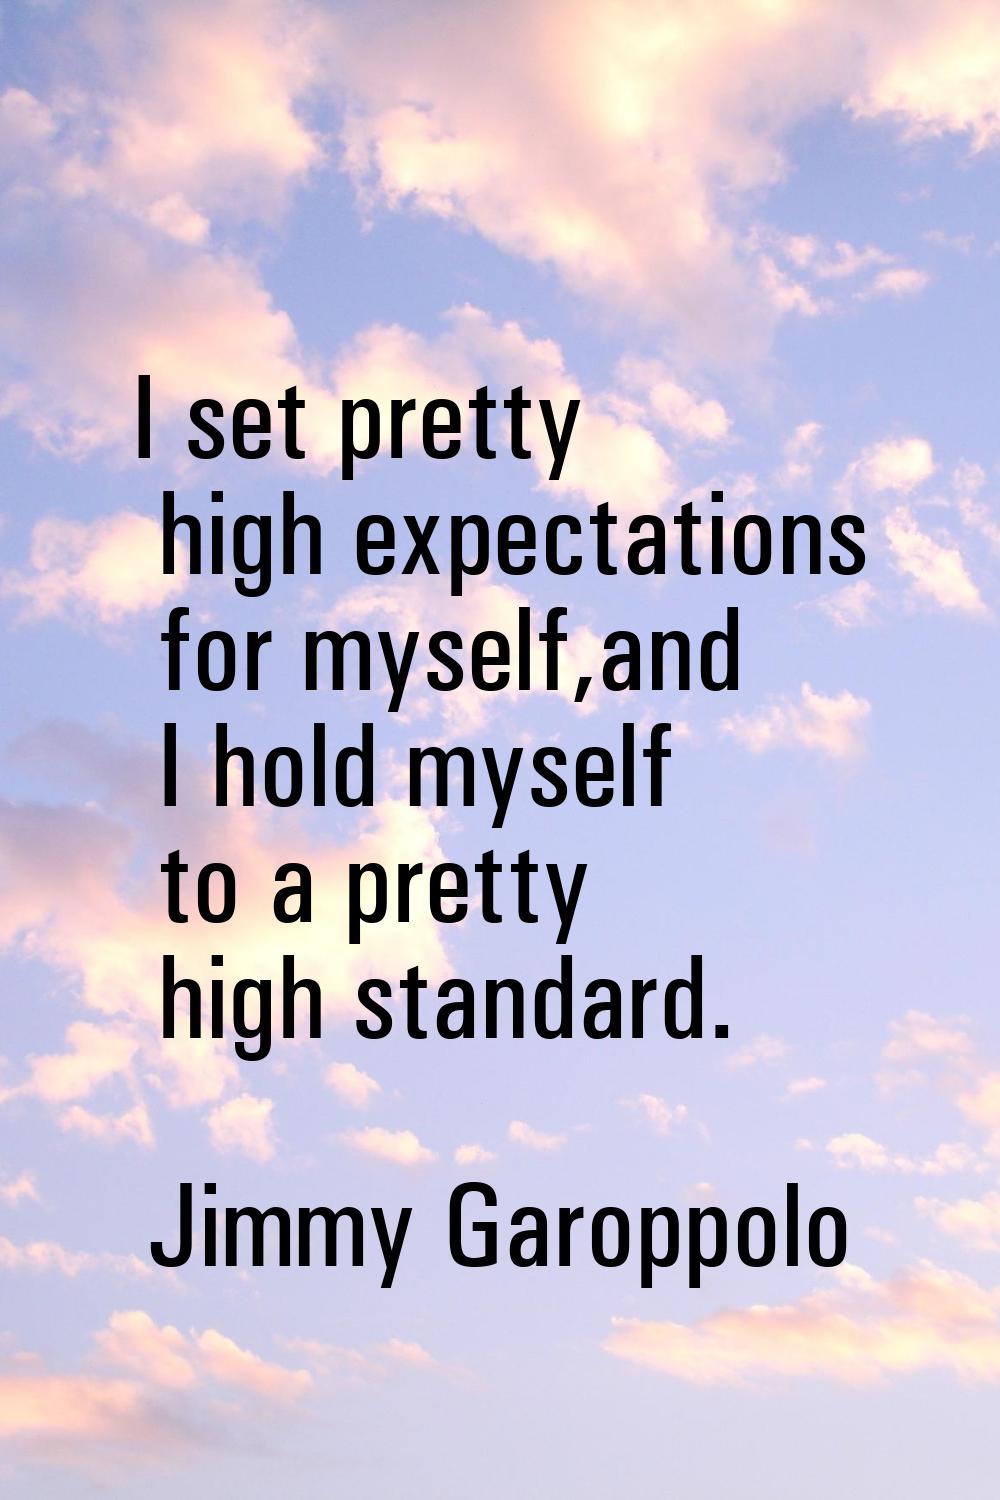 I set pretty high expectations for myself,and I hold myself to a pretty high standard.